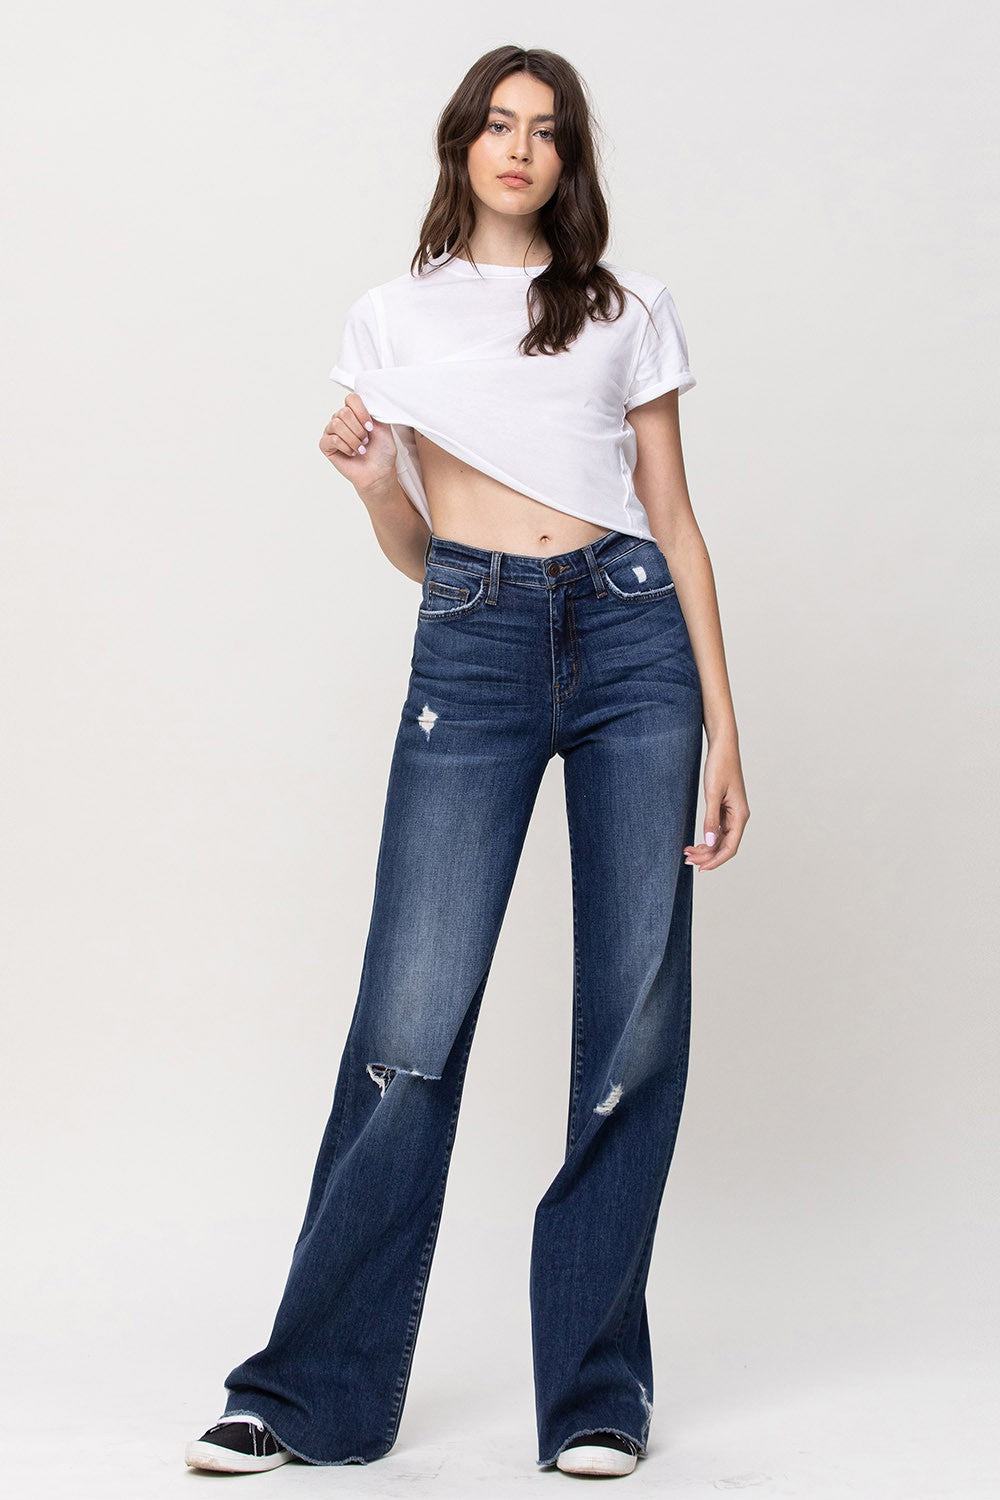 The Southern Sky Jeans